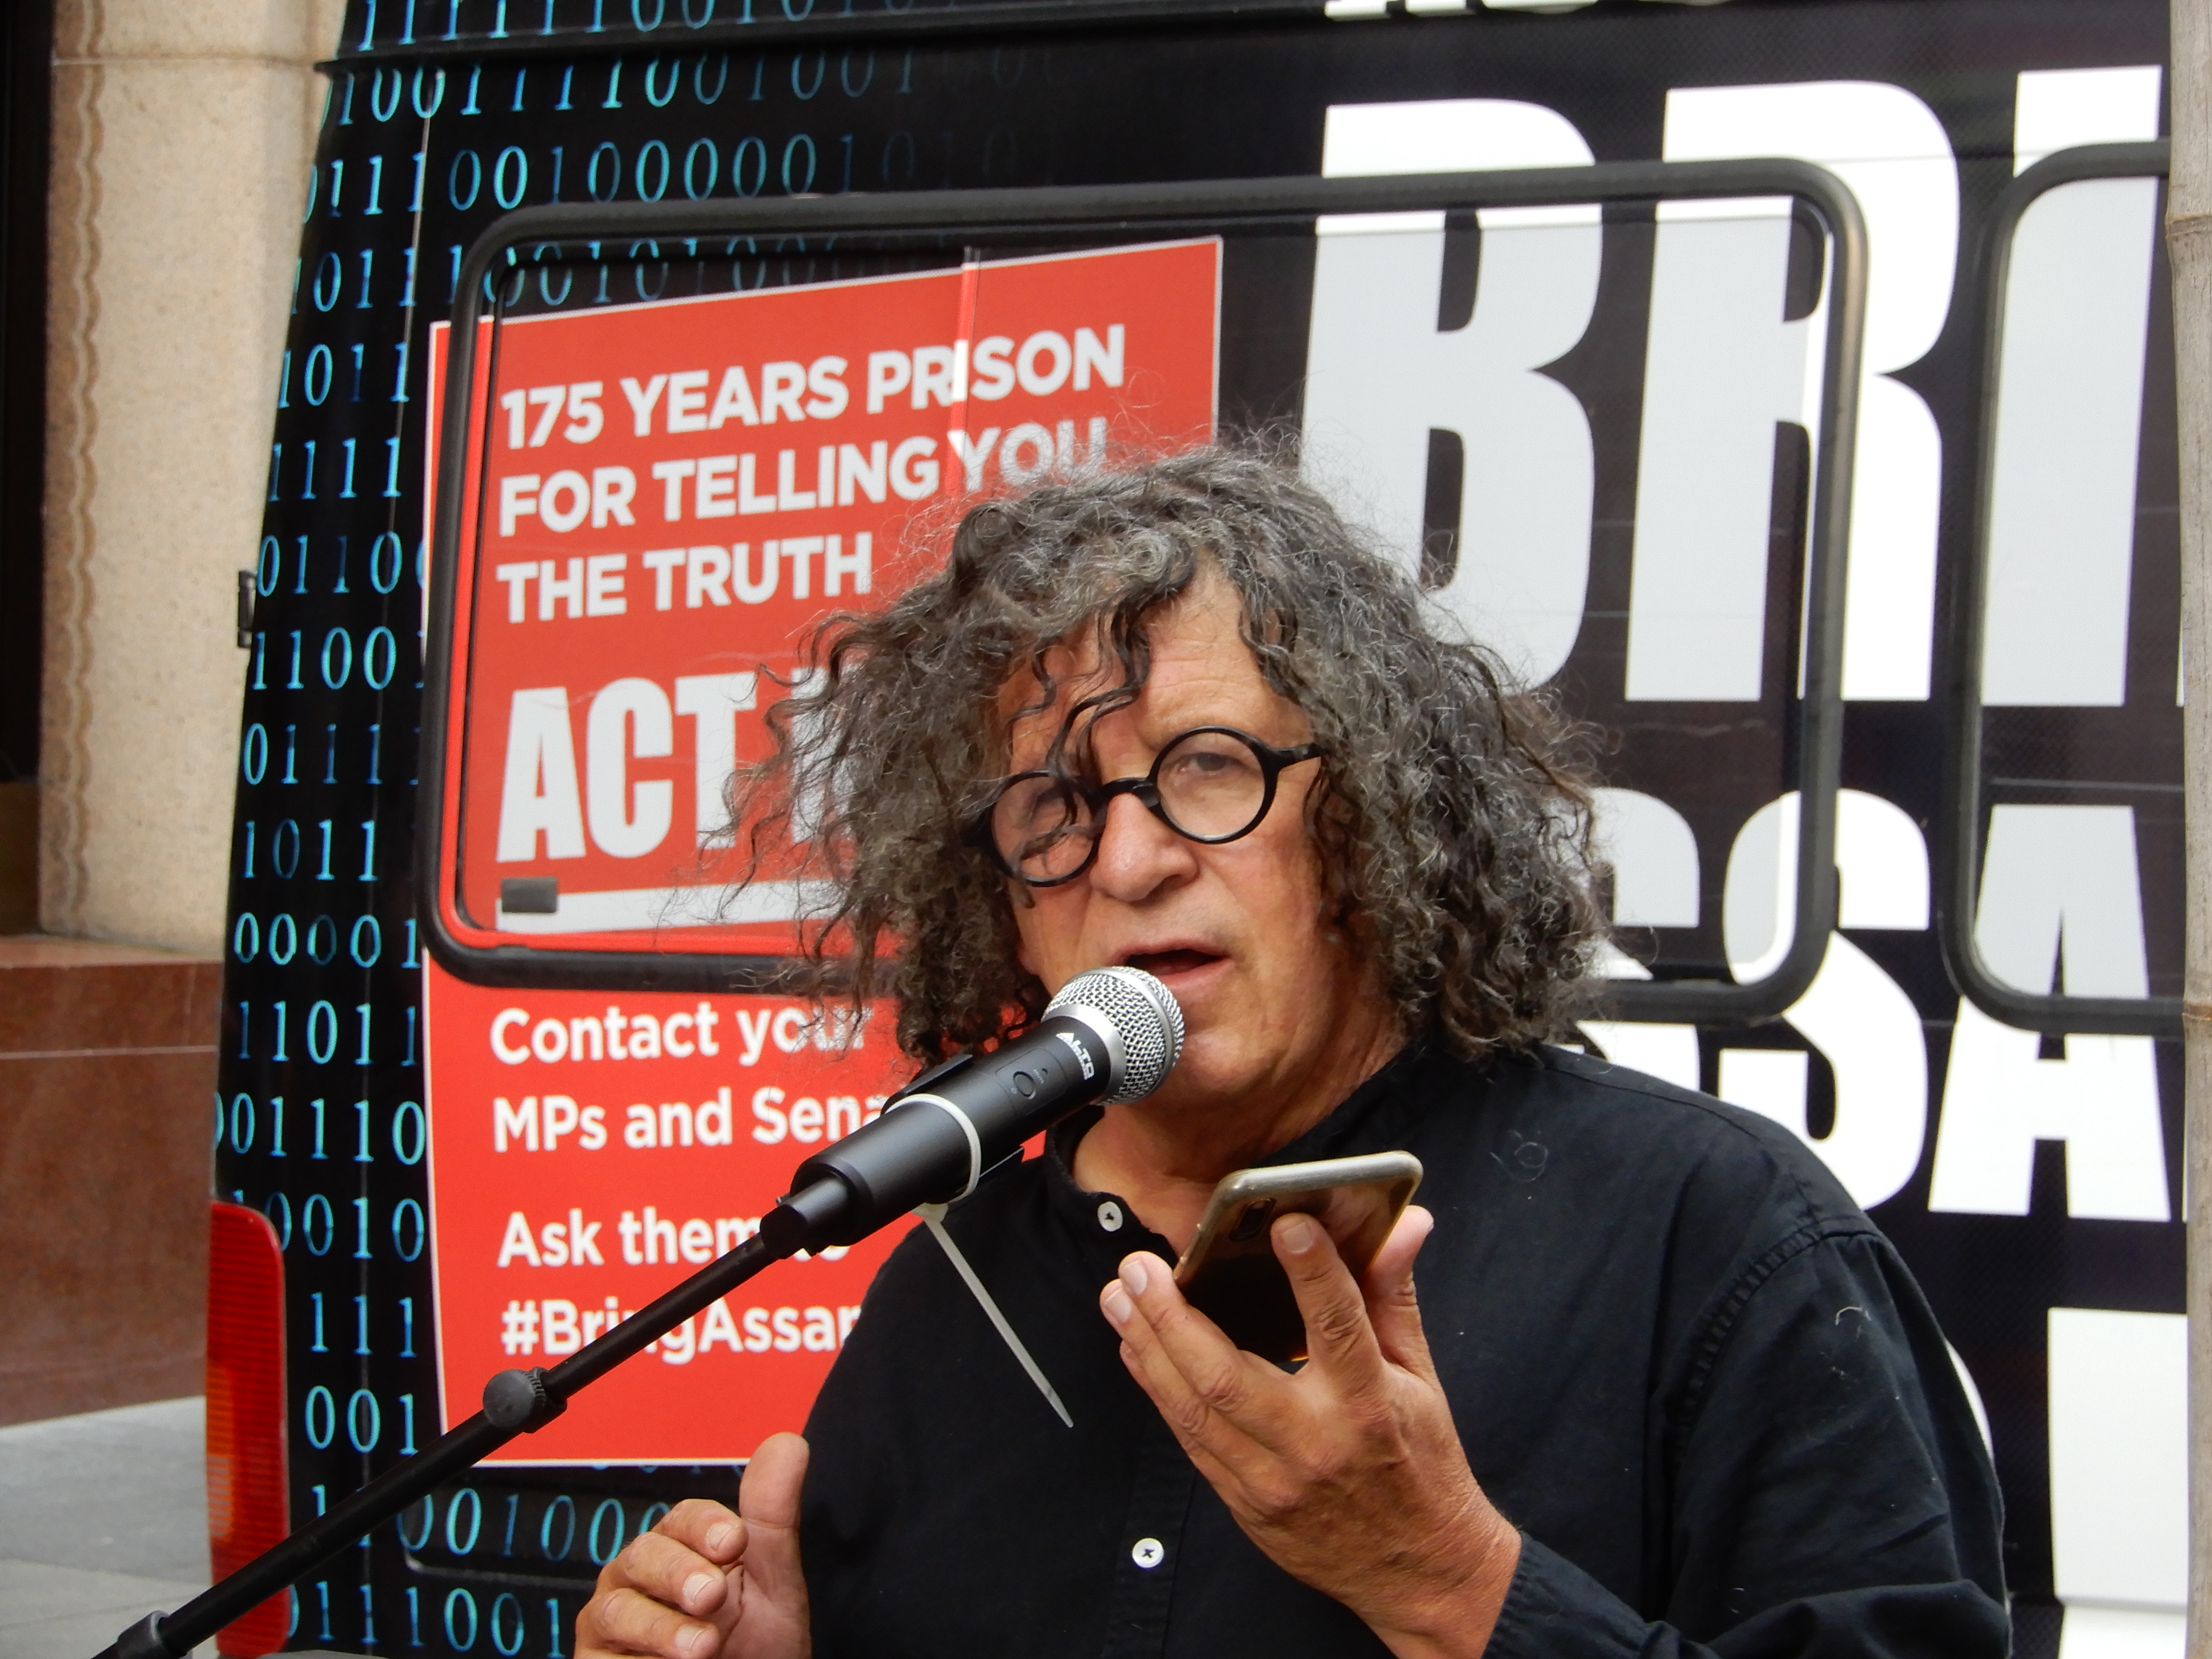 Antiwar campaigner Jacob Grech speaks at the Home Run for Julian rally in Sydney’s Martin Place in March 2021